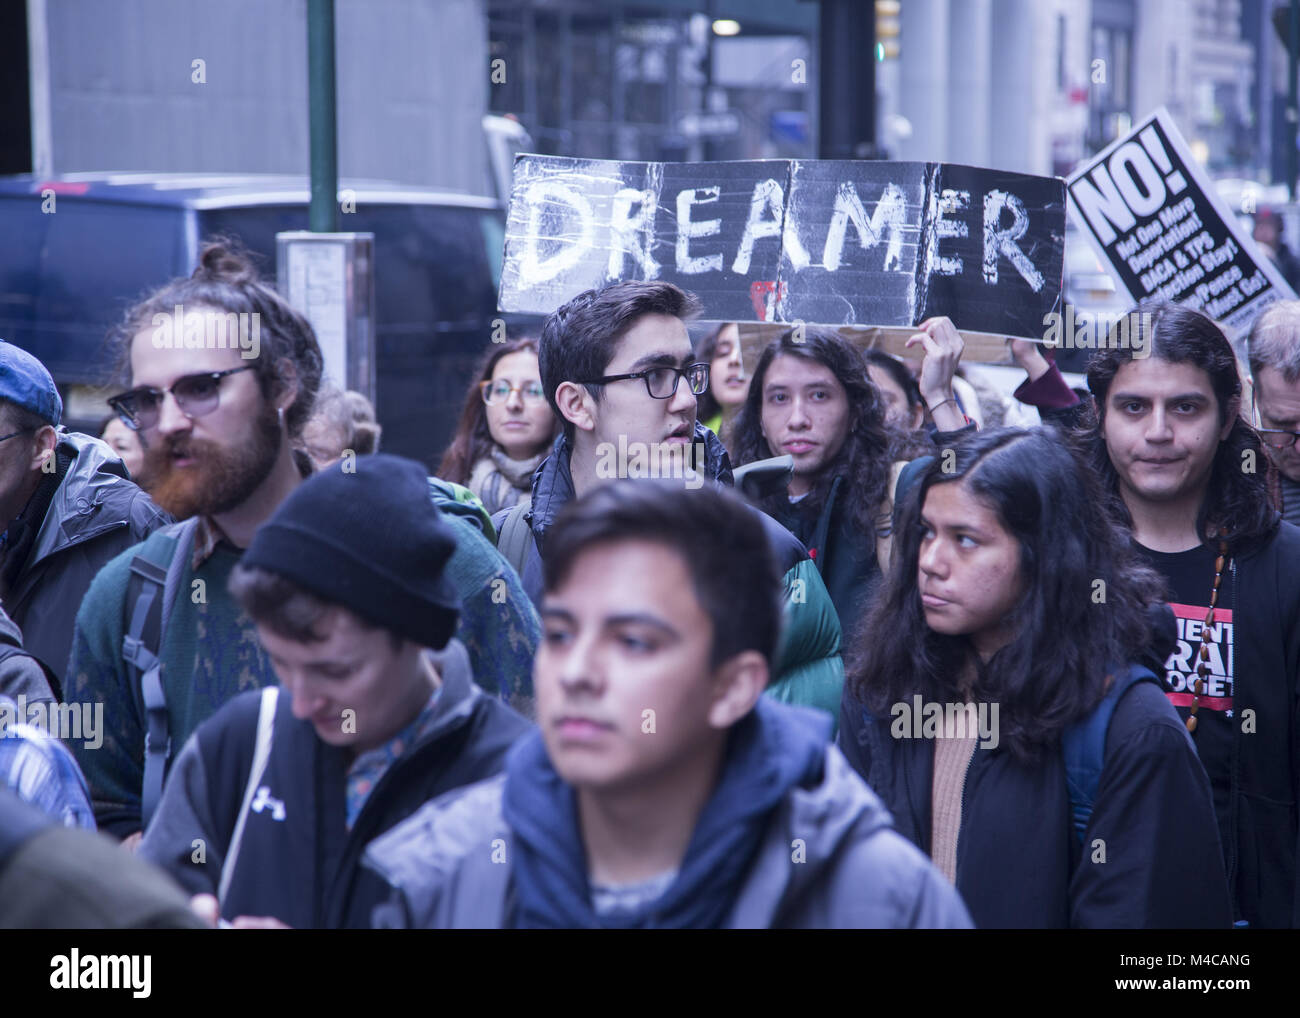 New York, USA. 15th Feb, 2018. Dreamers (DACA recipients) 'A Walk To Stay Home' march begins at Battery Park in NYC headed for Washington, D.C. to publicize their plight  and have congress do the right thing and give these young people permanent residence & a path to citizenship in the USA. Credit: David Grossman/Alamy Live News Stock Photo